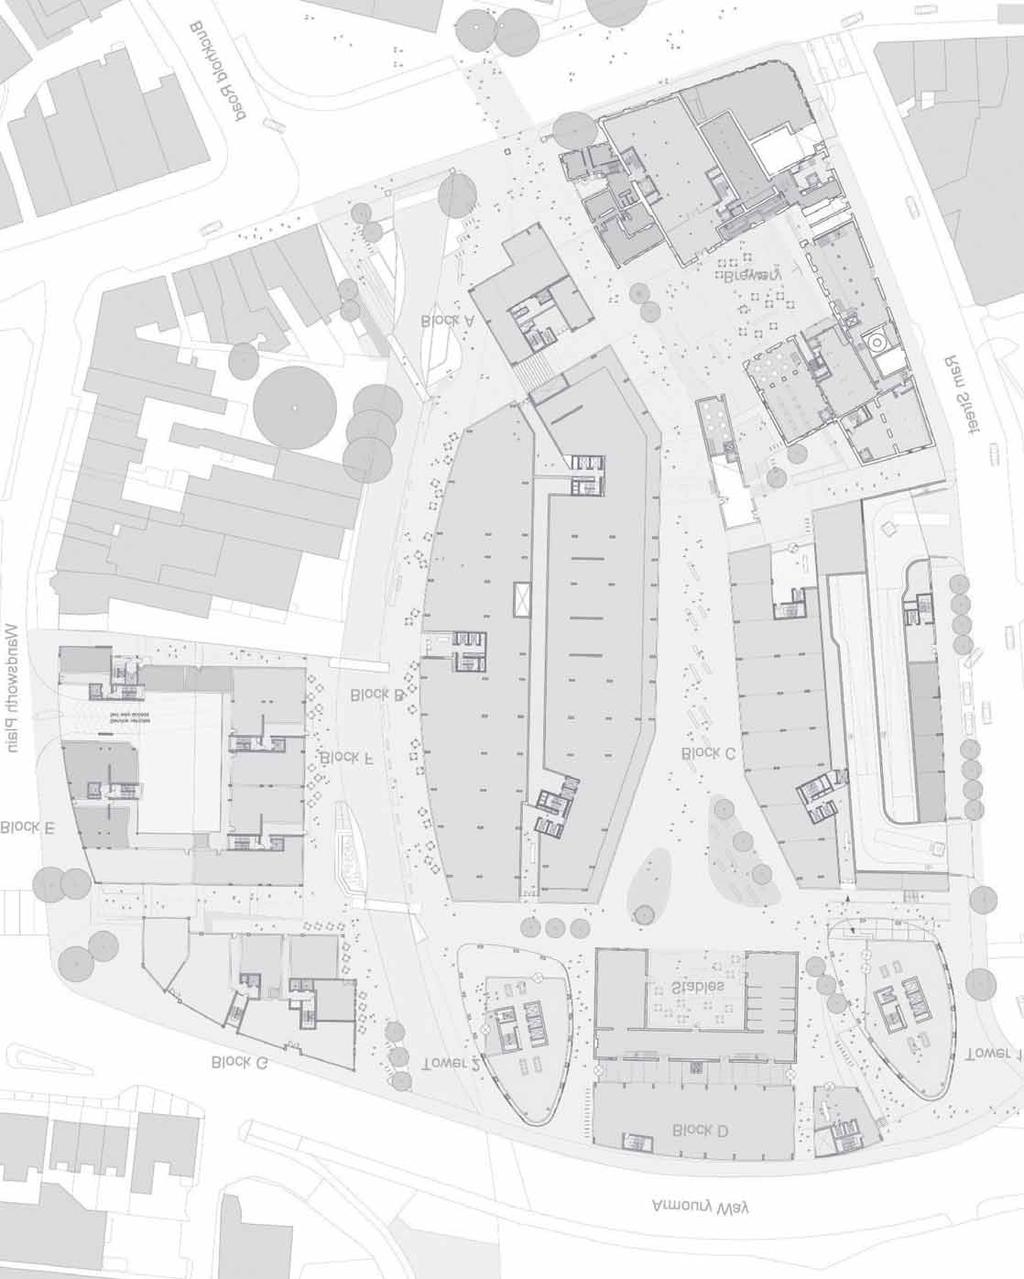 Ram Brewery, ; Capital Studios, Wandsworth Plain and Duval Works, Armoury Way, SW18 Diagram of proposed site layout identifying ground floor use and number of storeys 0 Denotes the highest